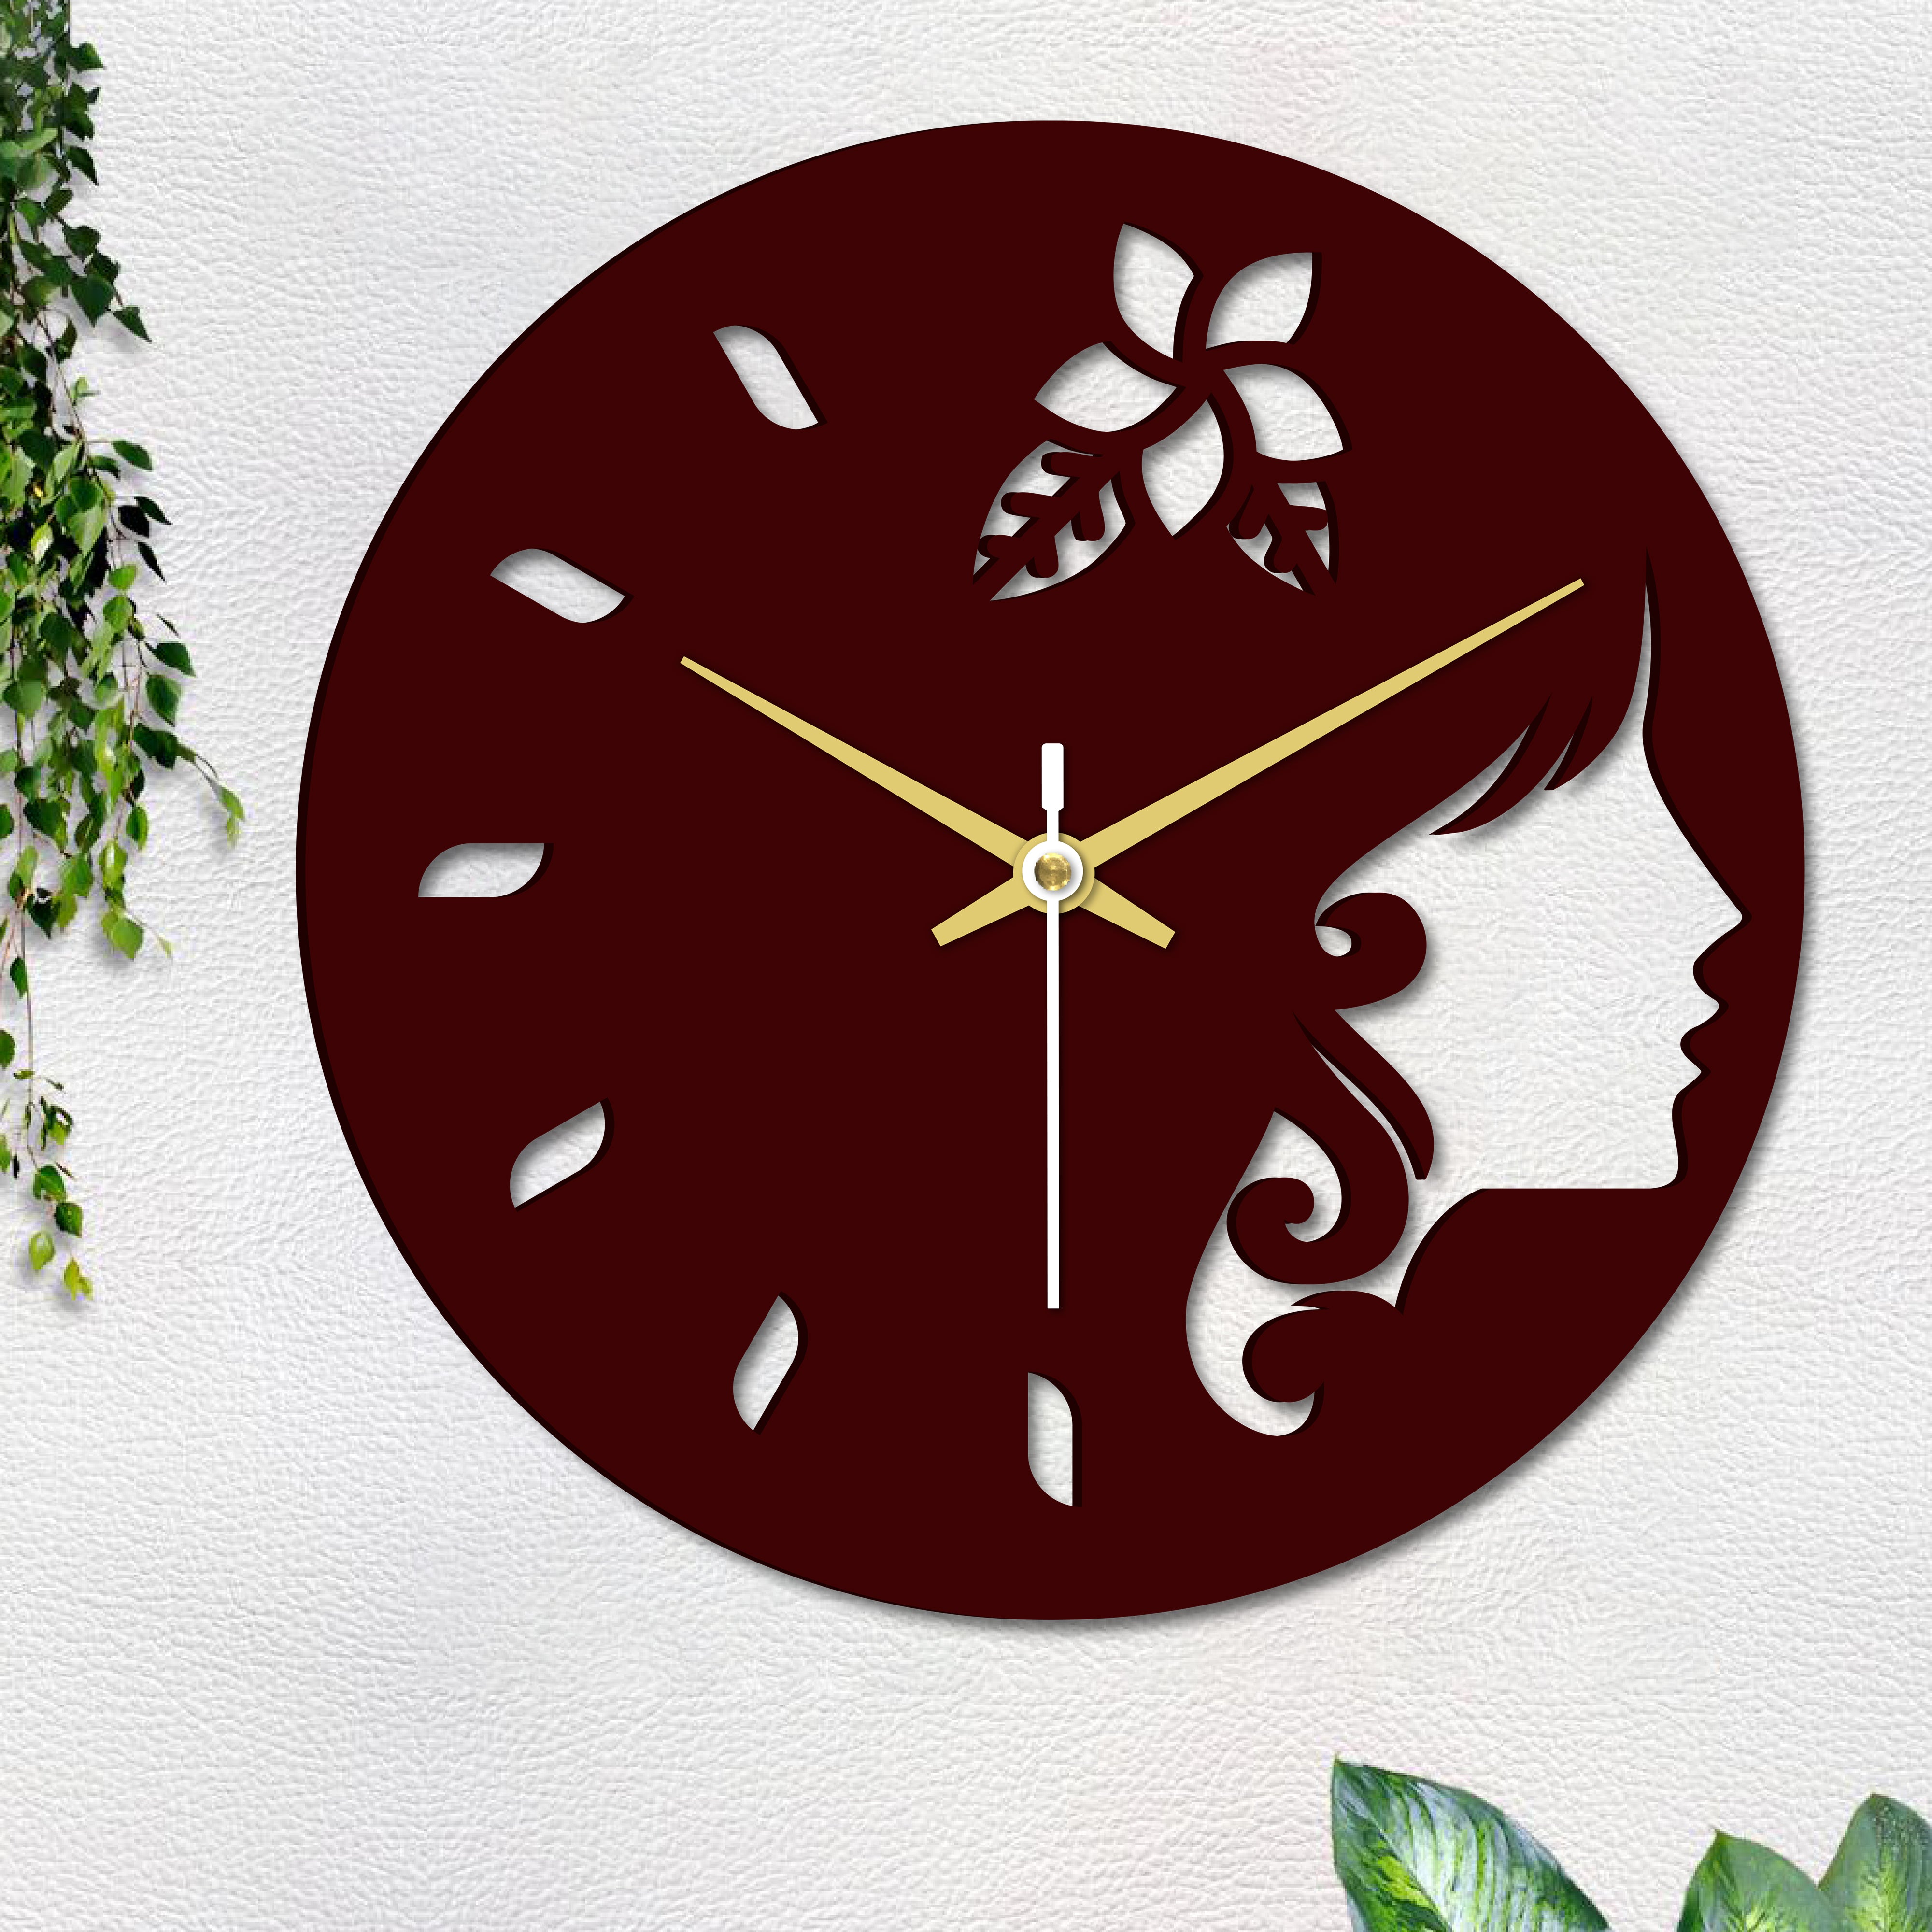 Girl Face in Wooden Wall Clock